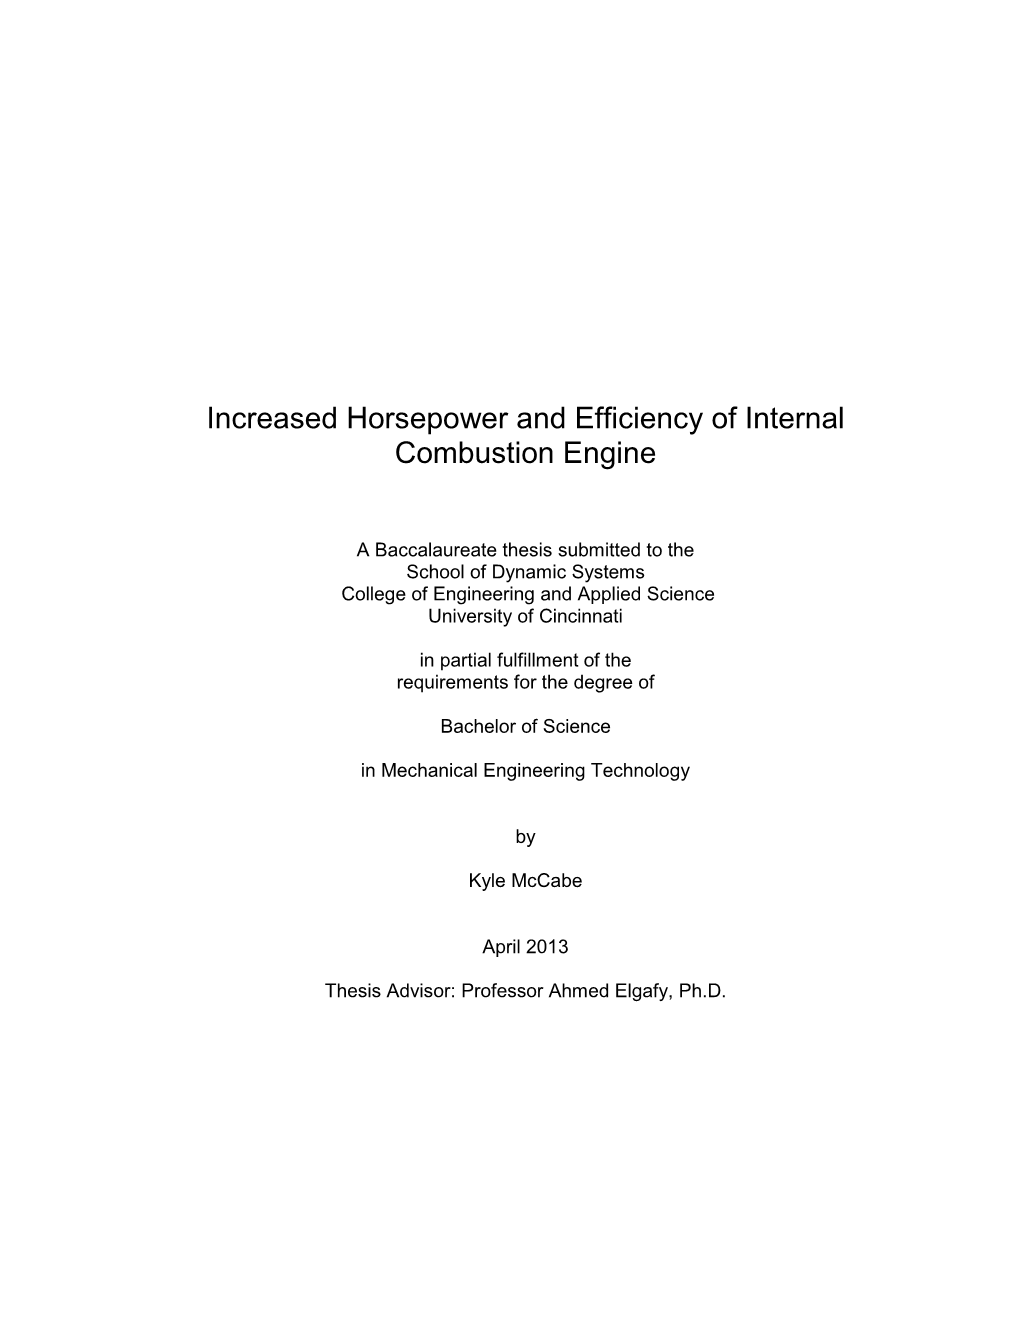 Increased Horsepower and Efficiency of Internal Combustion Engine